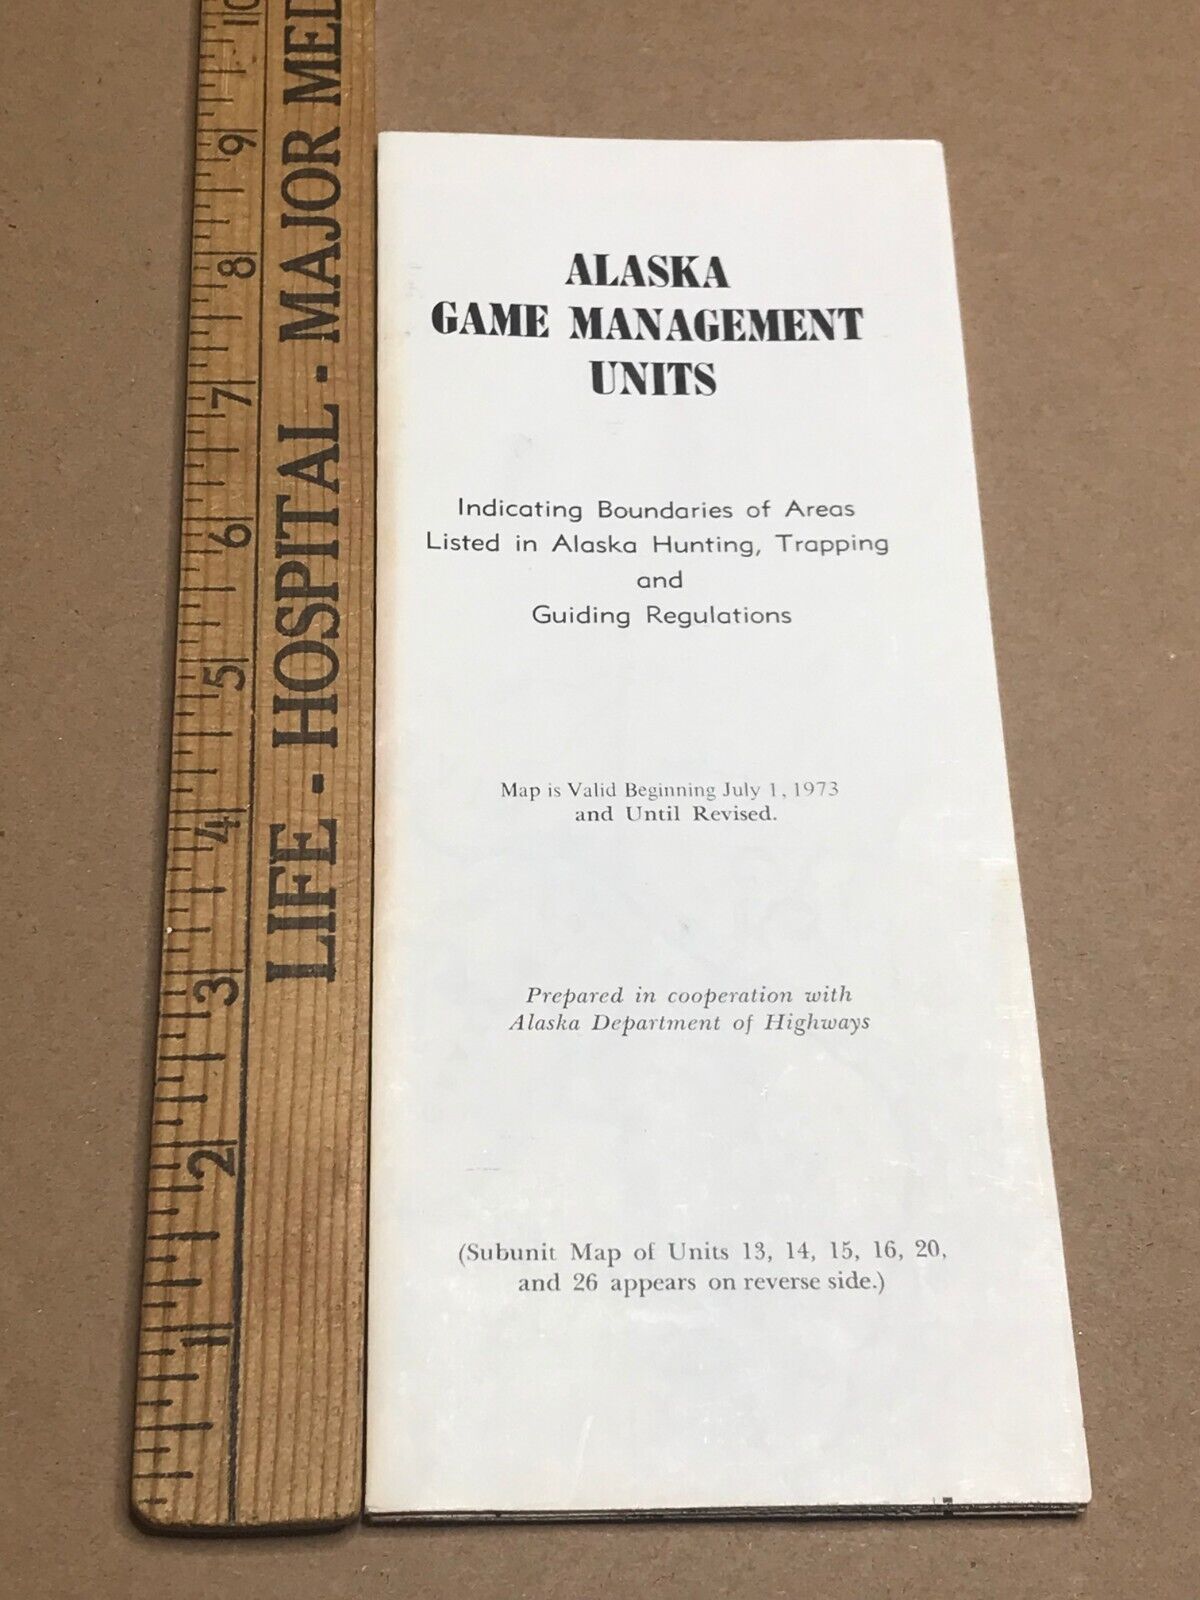 1973 ALASKA GAME MANAGEMENT UNITS Hunting Trapping Guiding Regulations